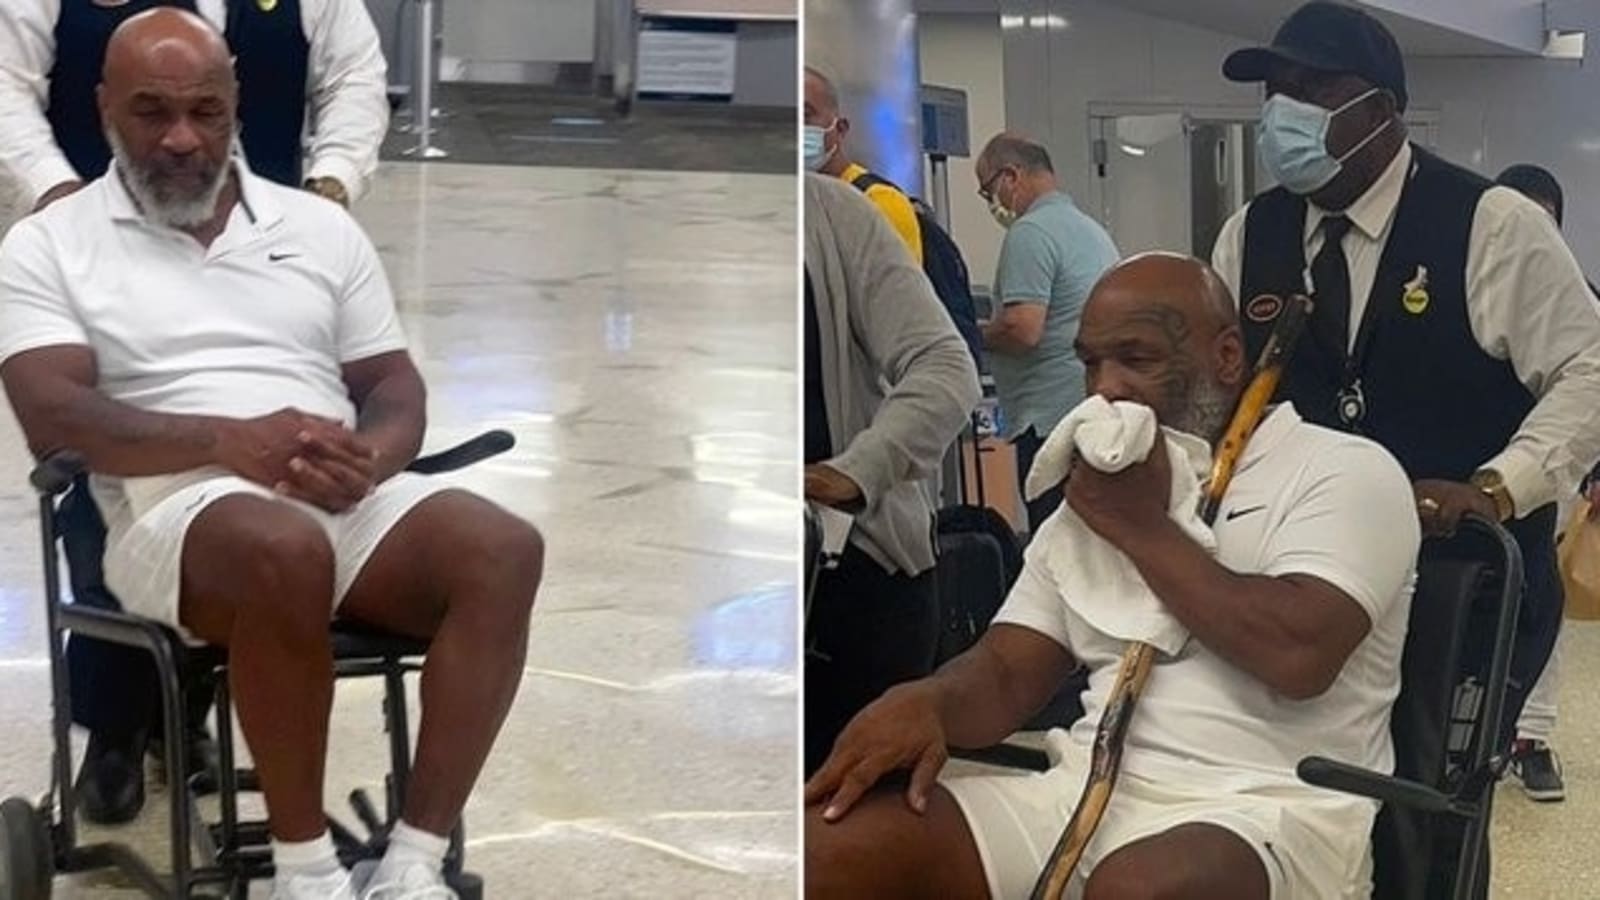 Boxing legend Mike Tyson spotted in wheelchair at Miami; pics go viral - Hindustan Times